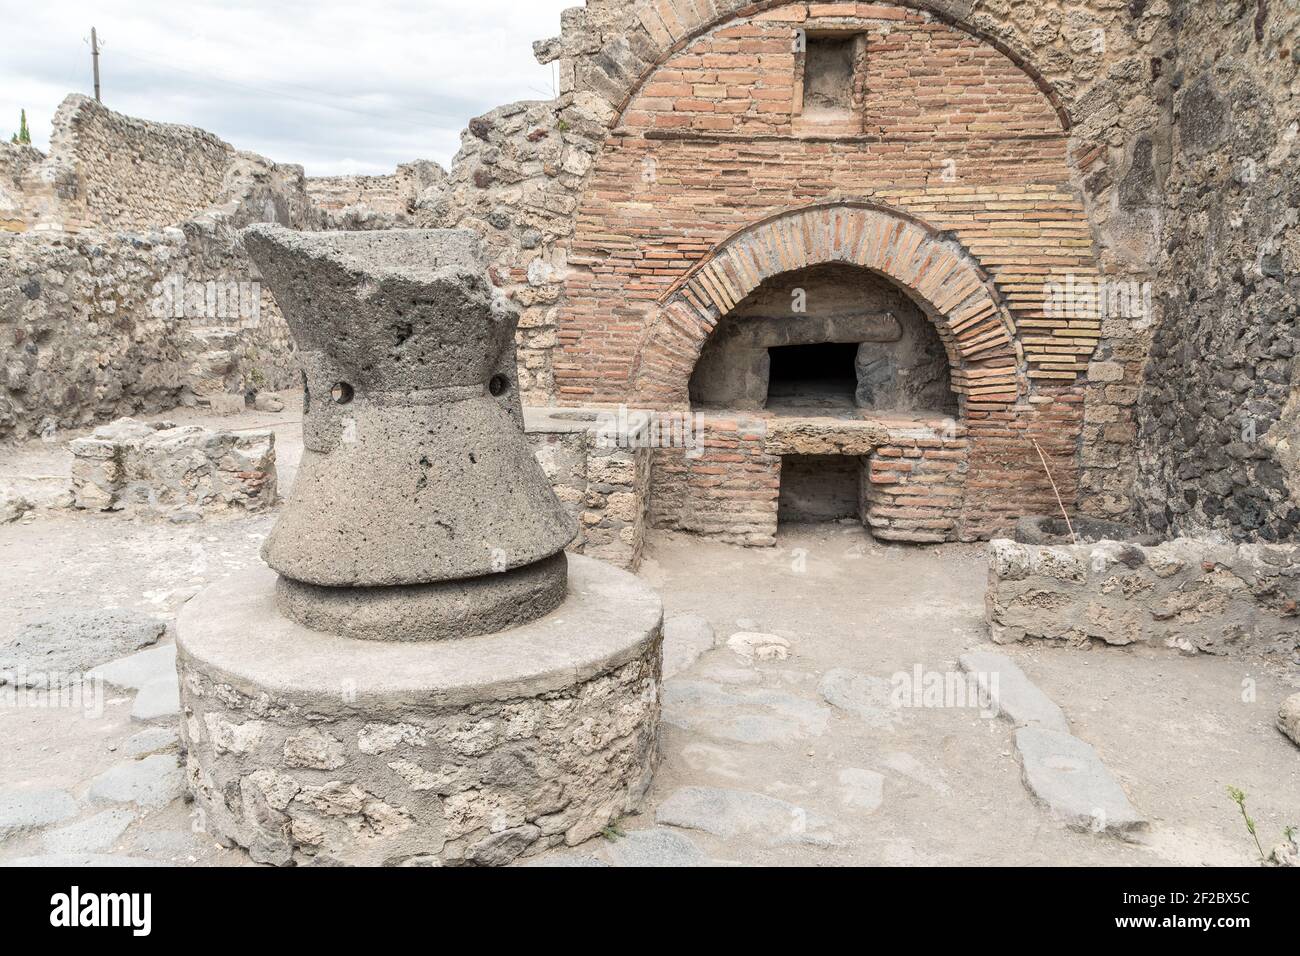 Tabernae pistrinum (Ancient baker with oven and mill) in the ancient roman site of Pompeii, near Naples. It was completely destroyed by the eruption o Stock Photo